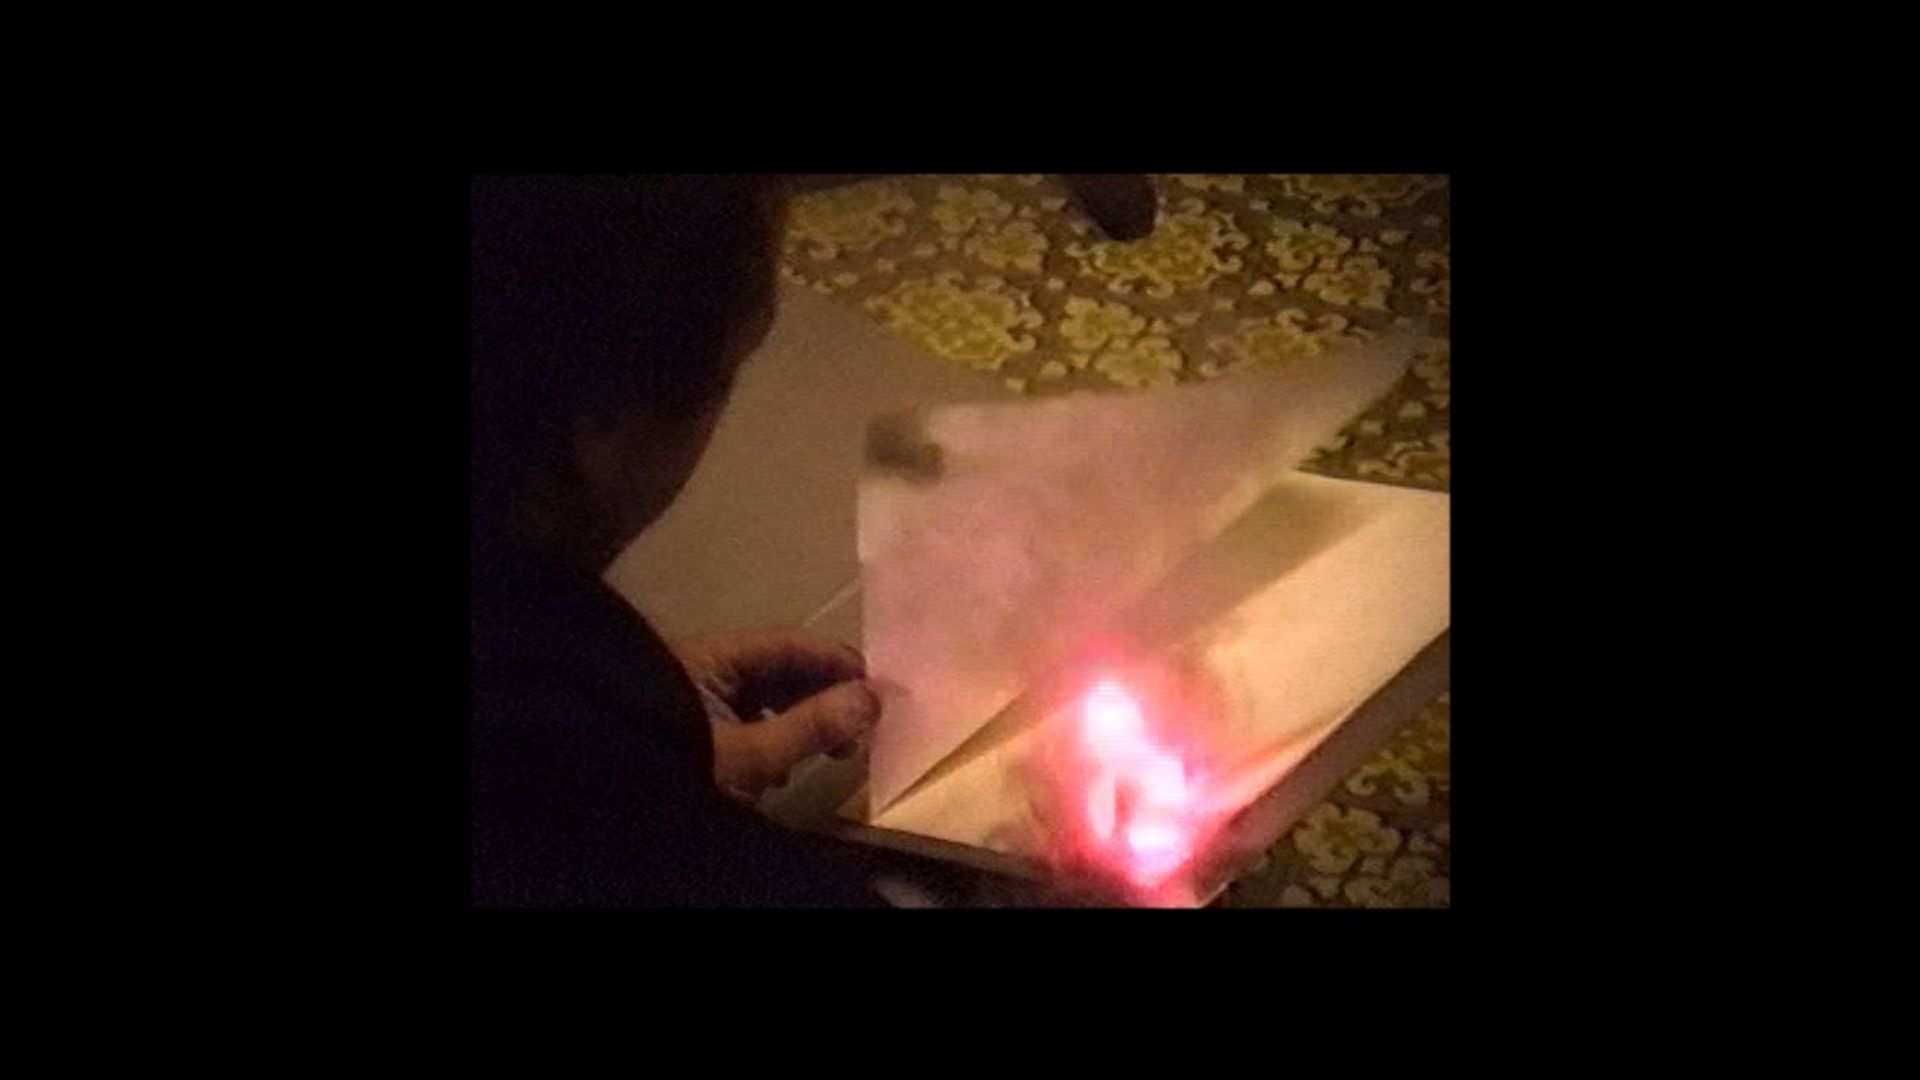 Archival material: Side view of an unrecognisable person turning a page of a burning book.